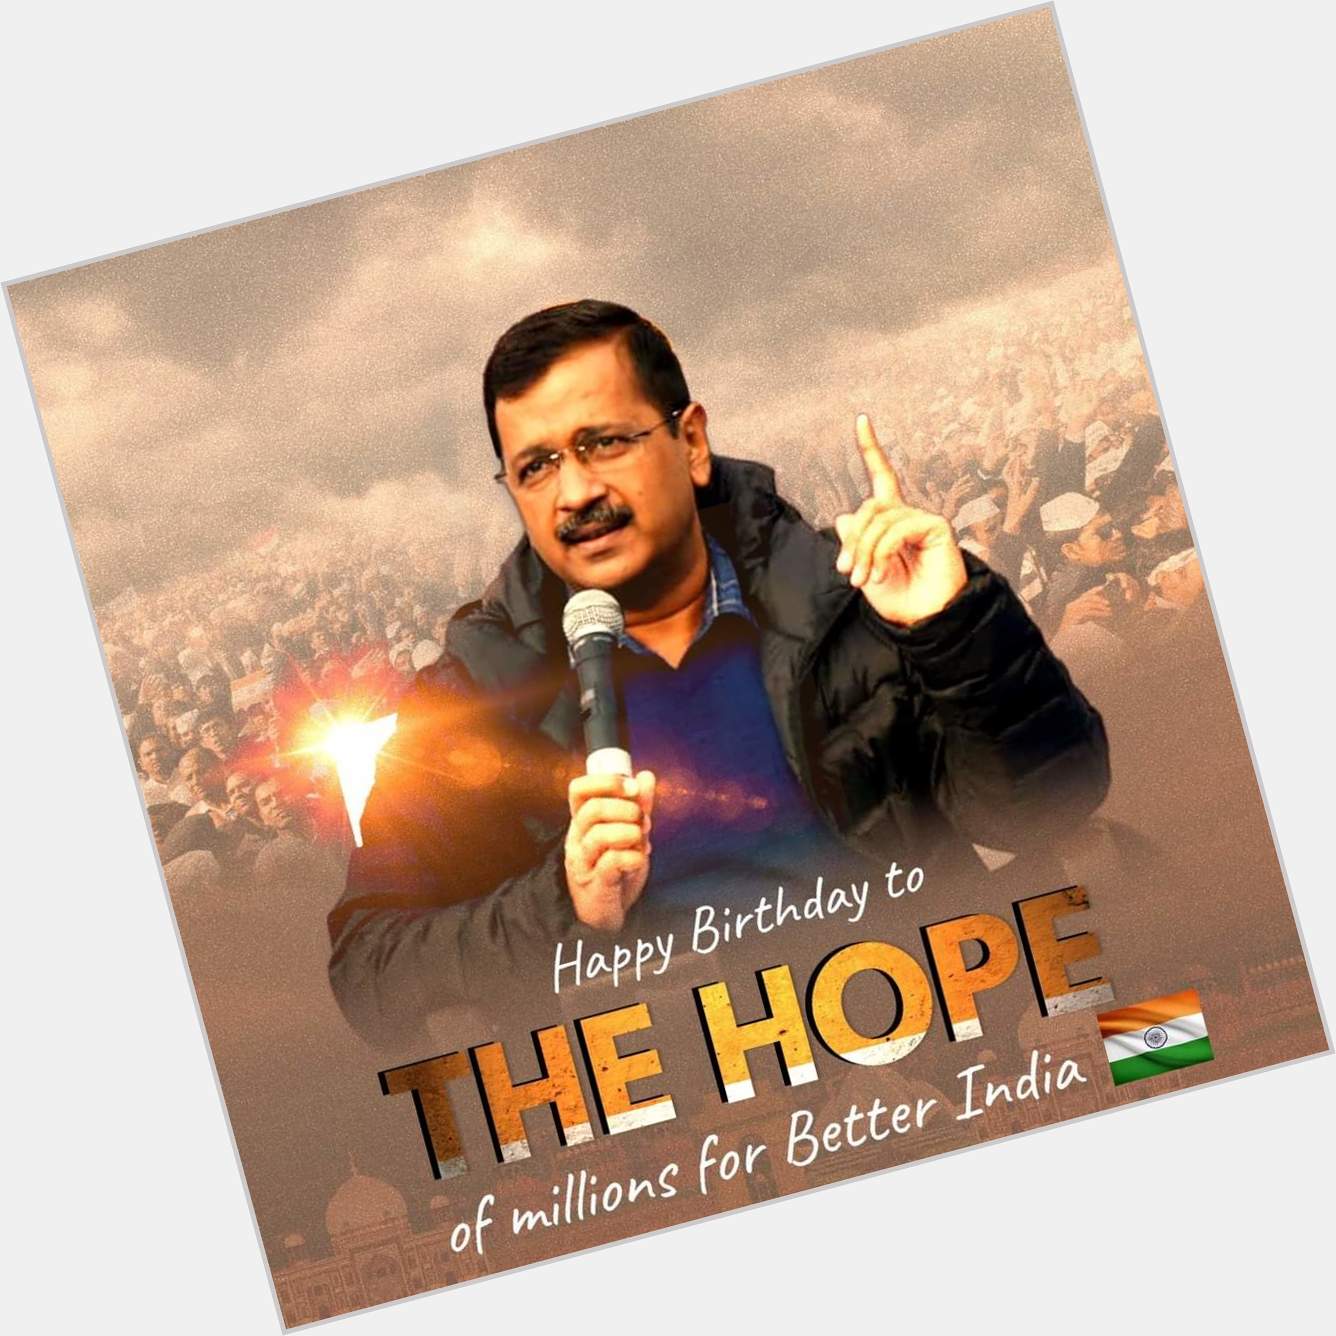 THE HOPE OF MILLIONS FOR BETTER INDIA. 

Happy Birthday Arvind Kejriwal.   